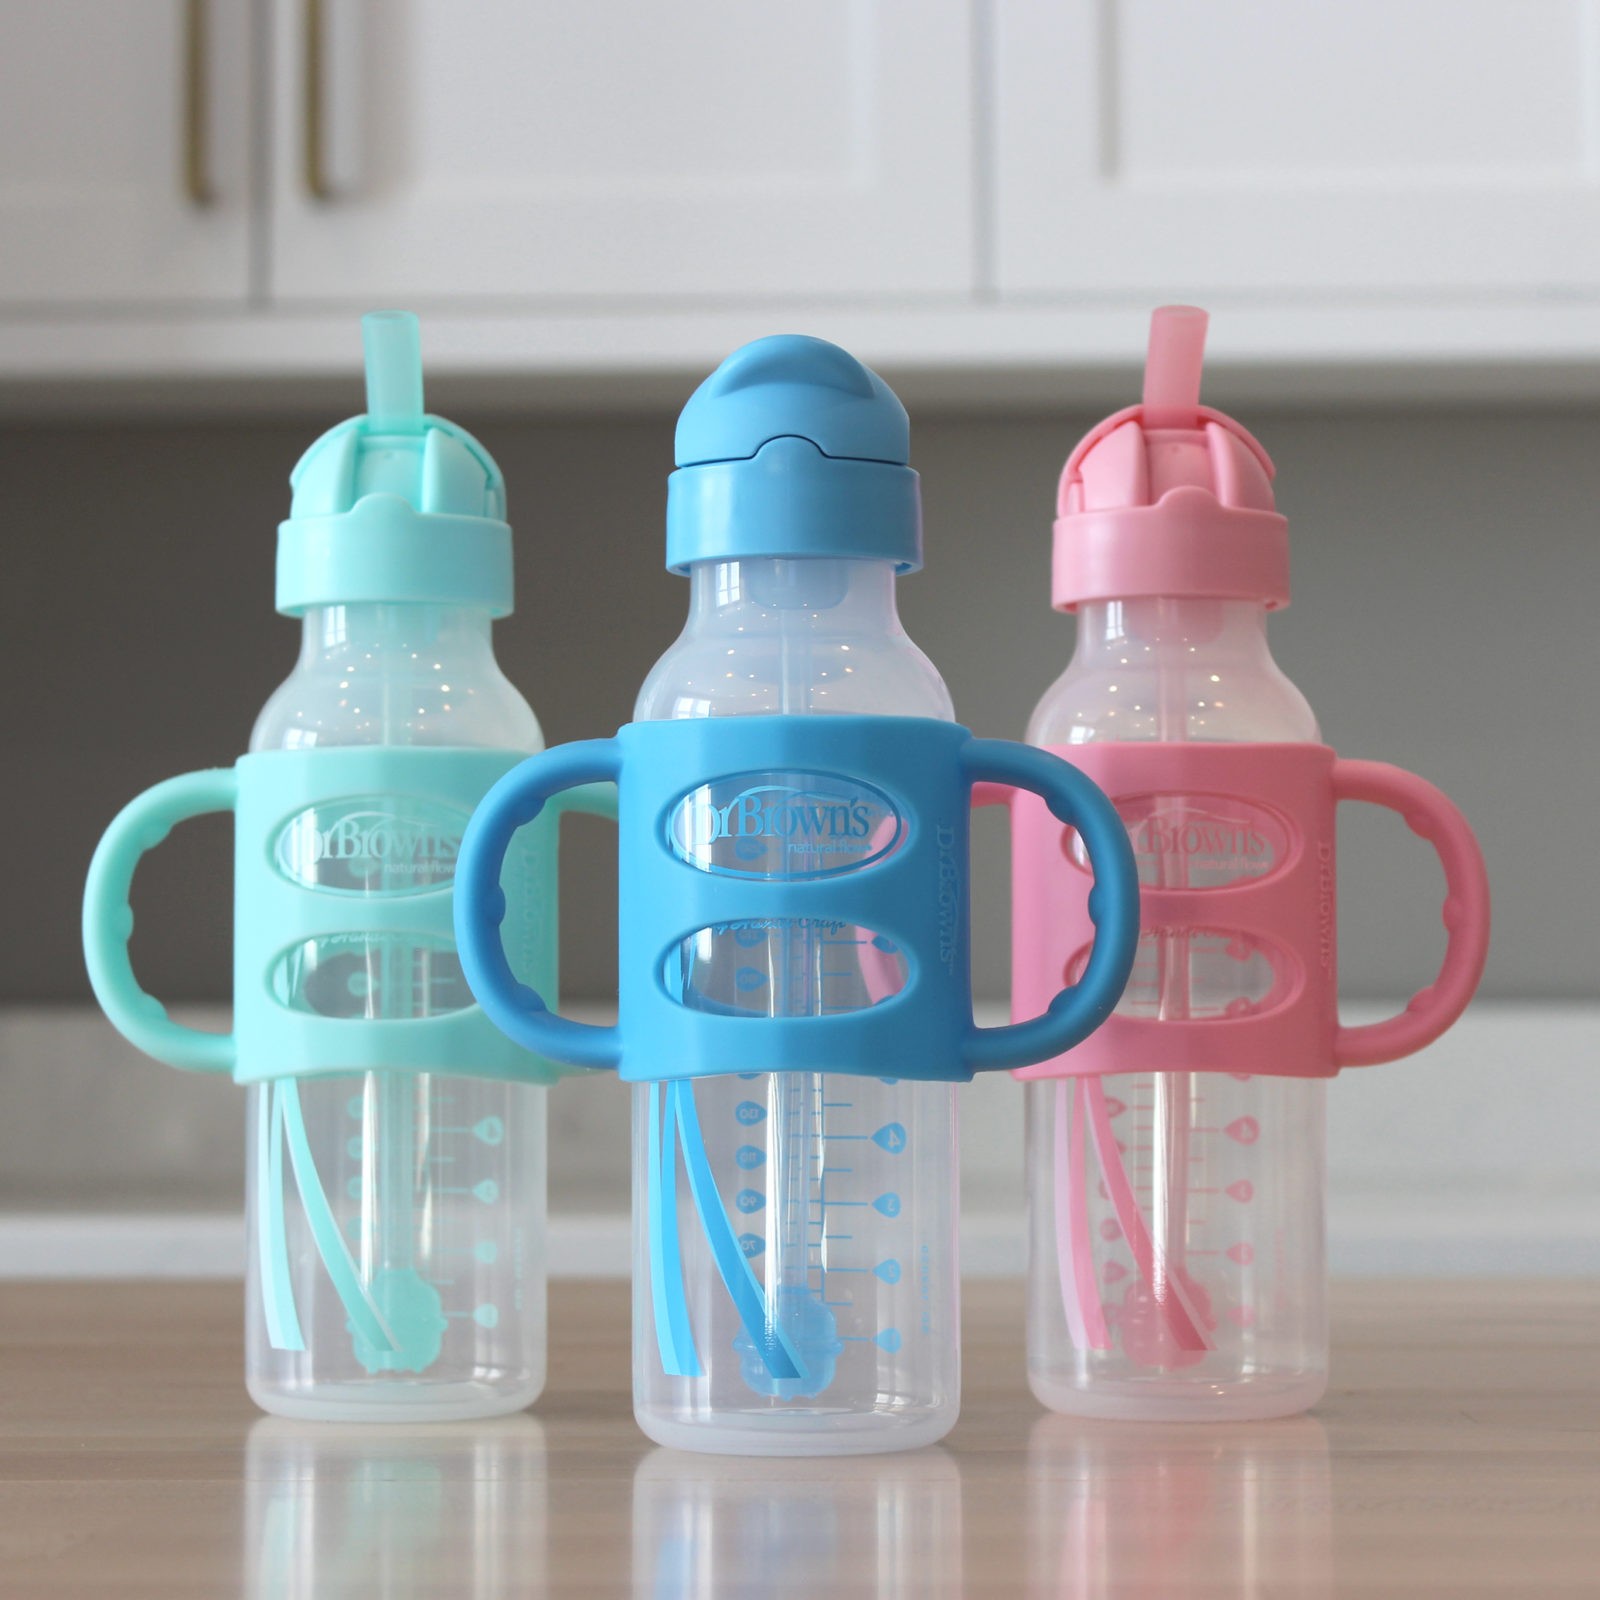 Dr. Brown's Dr. Brown’s® Milestones™ Narrow Sippy Straw Bottle with Silicone Handles, 8oz/250mL